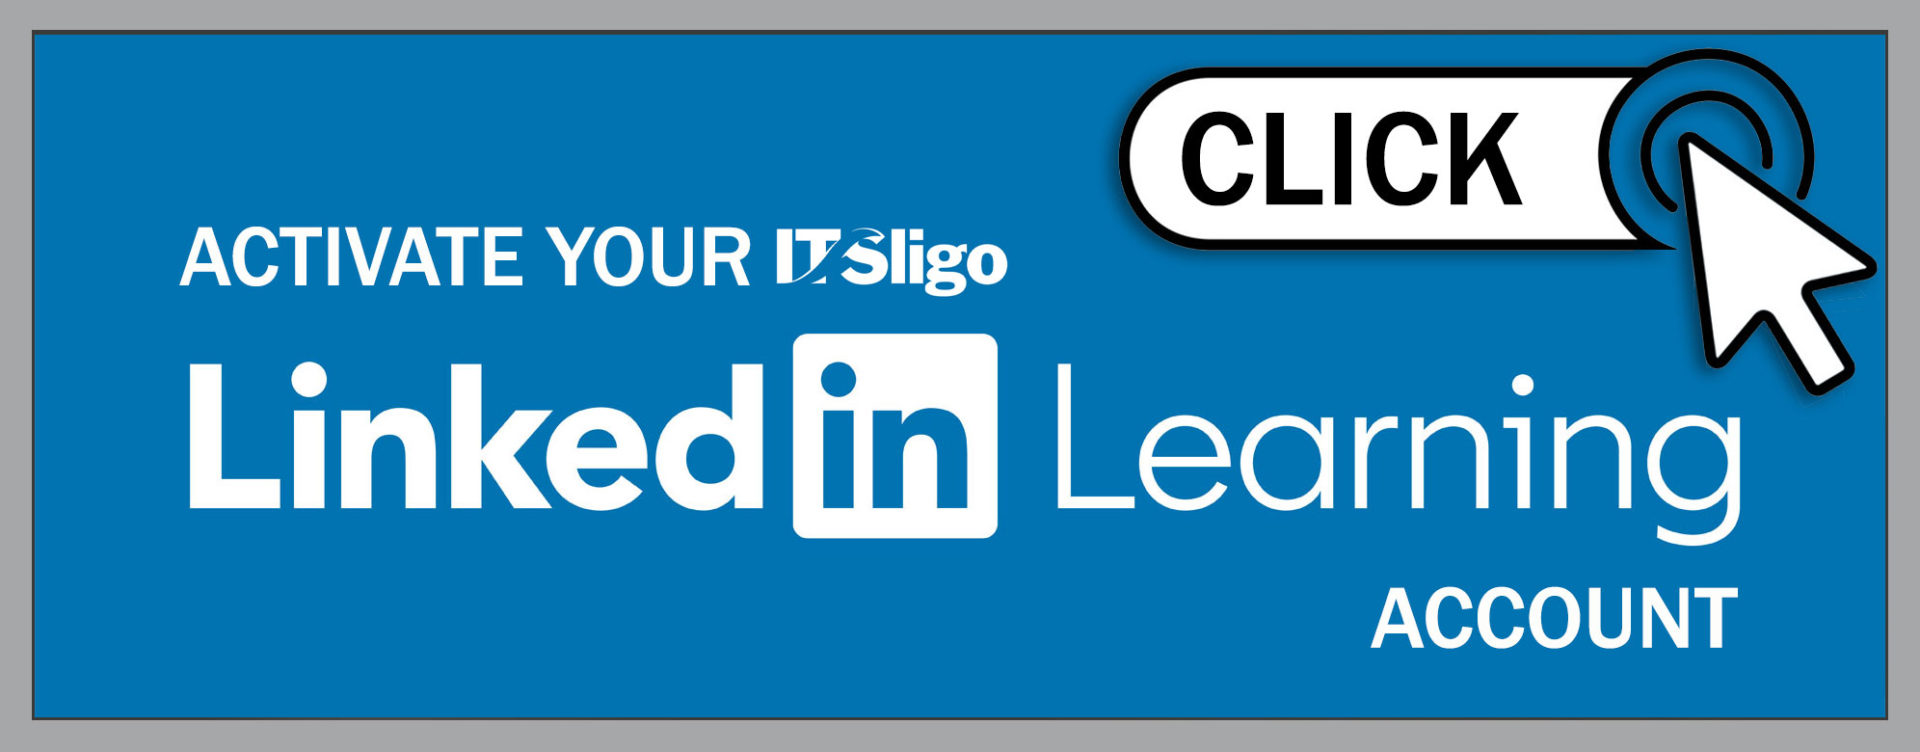 Click here to Activate your Unique LinkedIn Learning Account